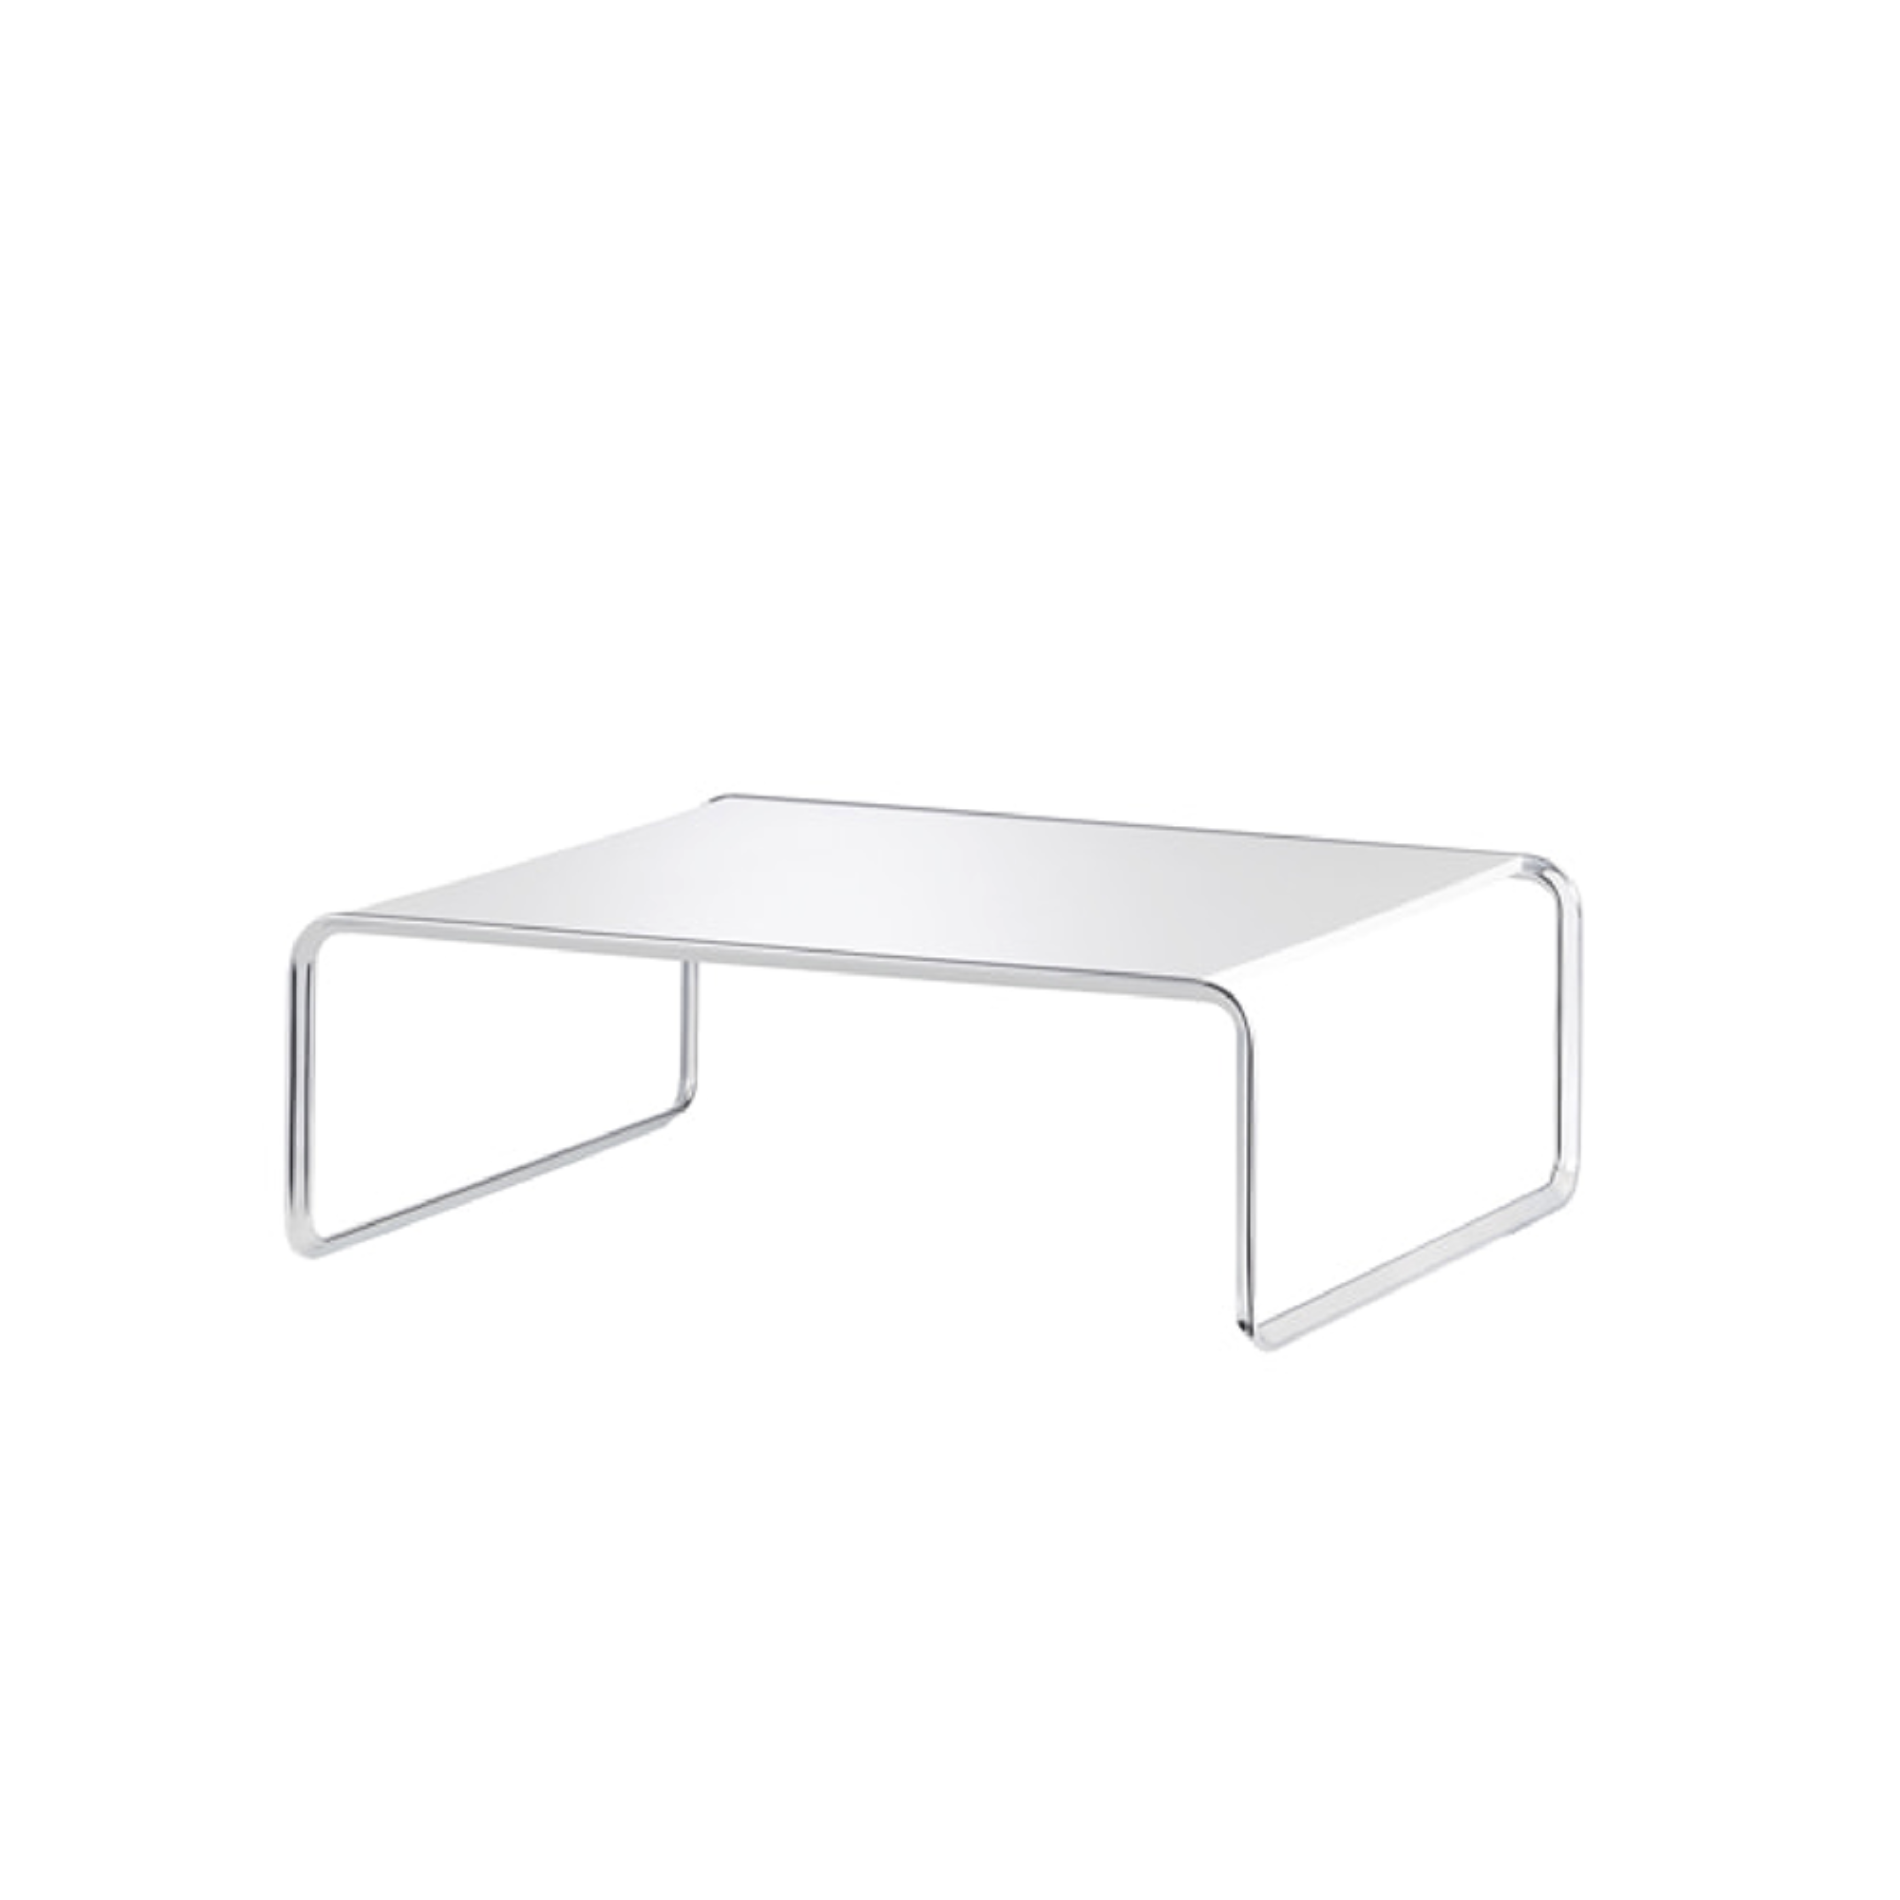 TECTA K1B Oblique Couch Table - White